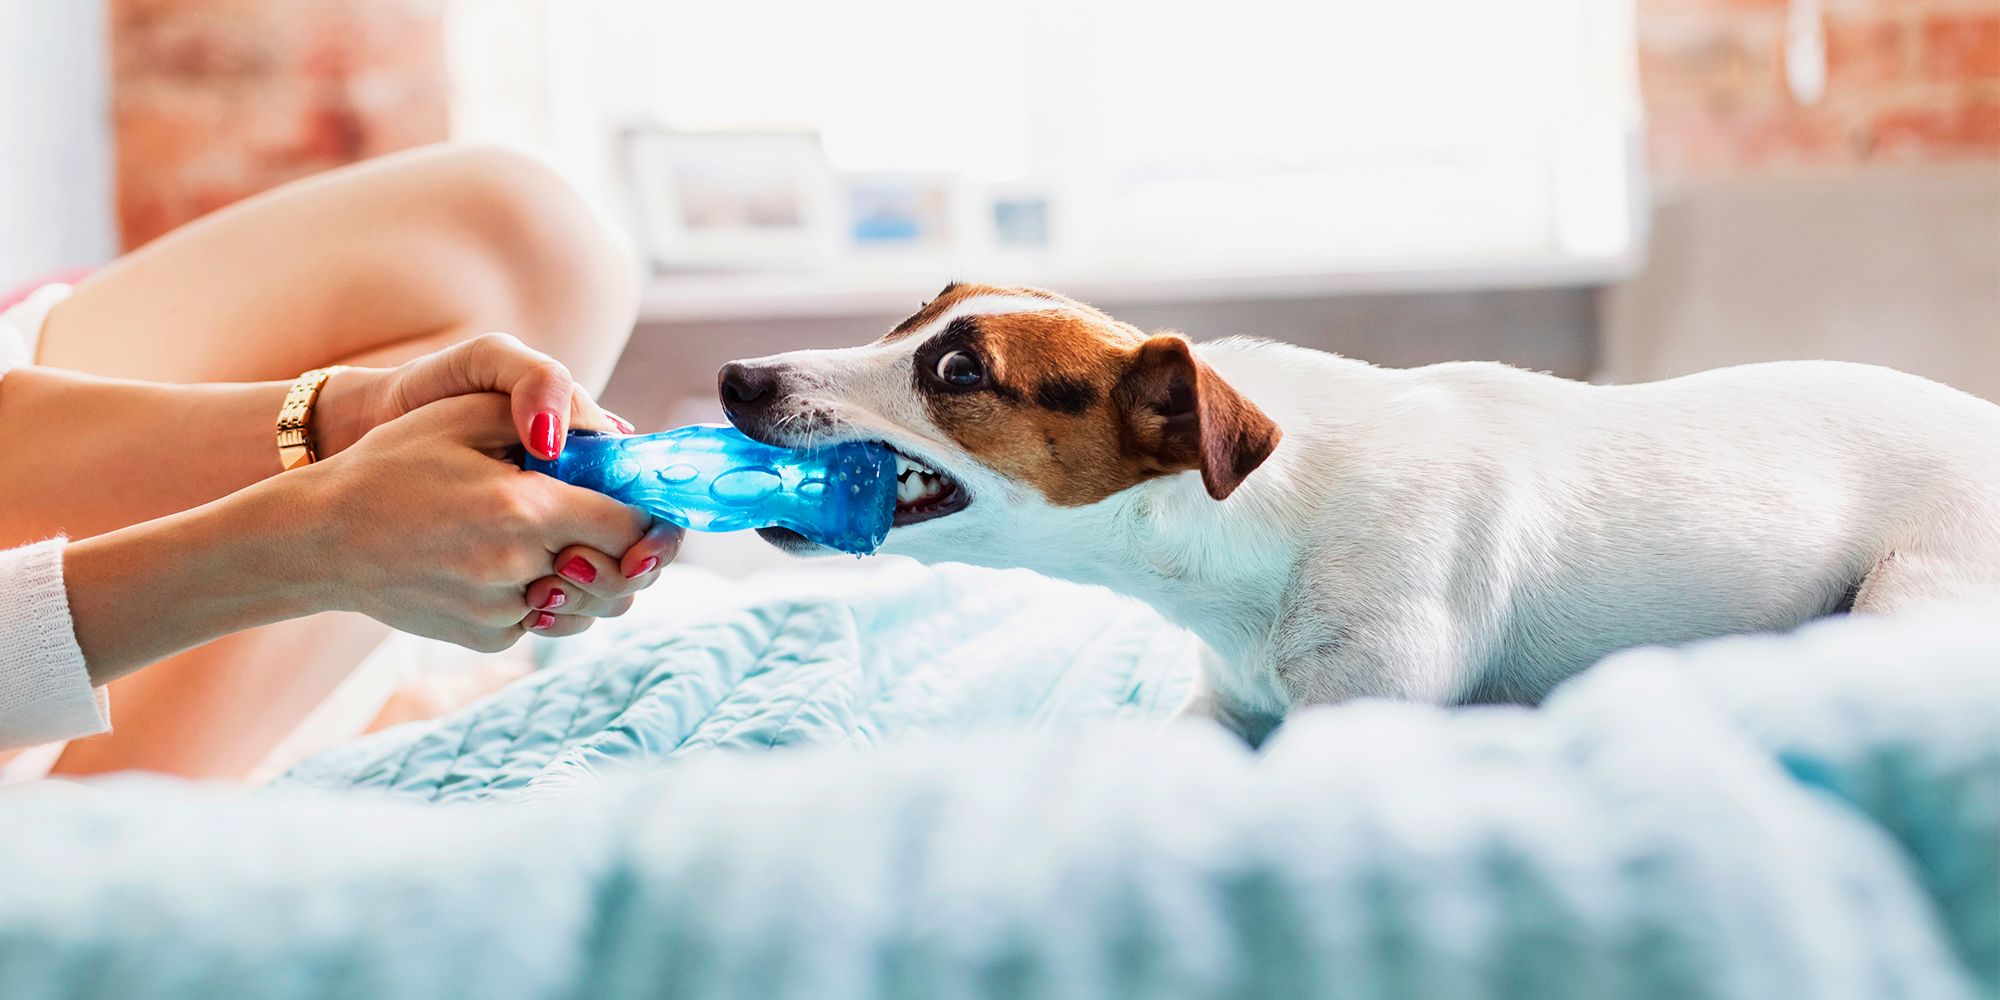 best dog toys to keep them busy